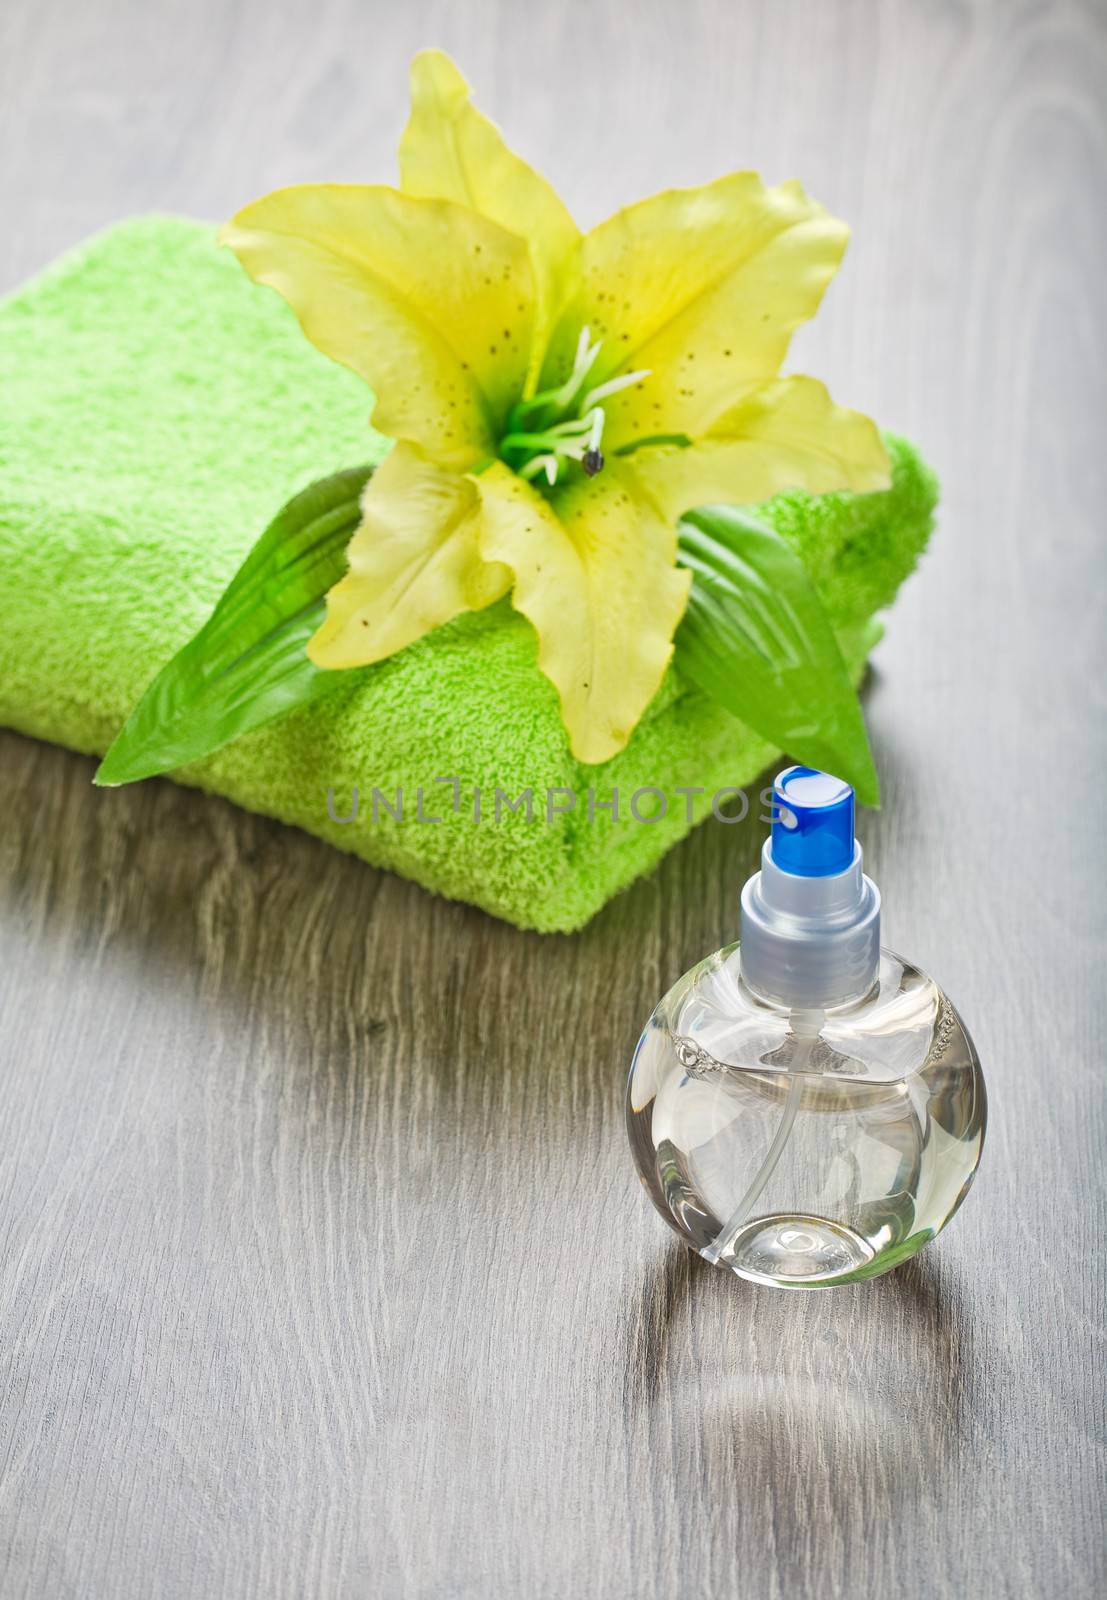 yellow flower on towel and transparent bottle